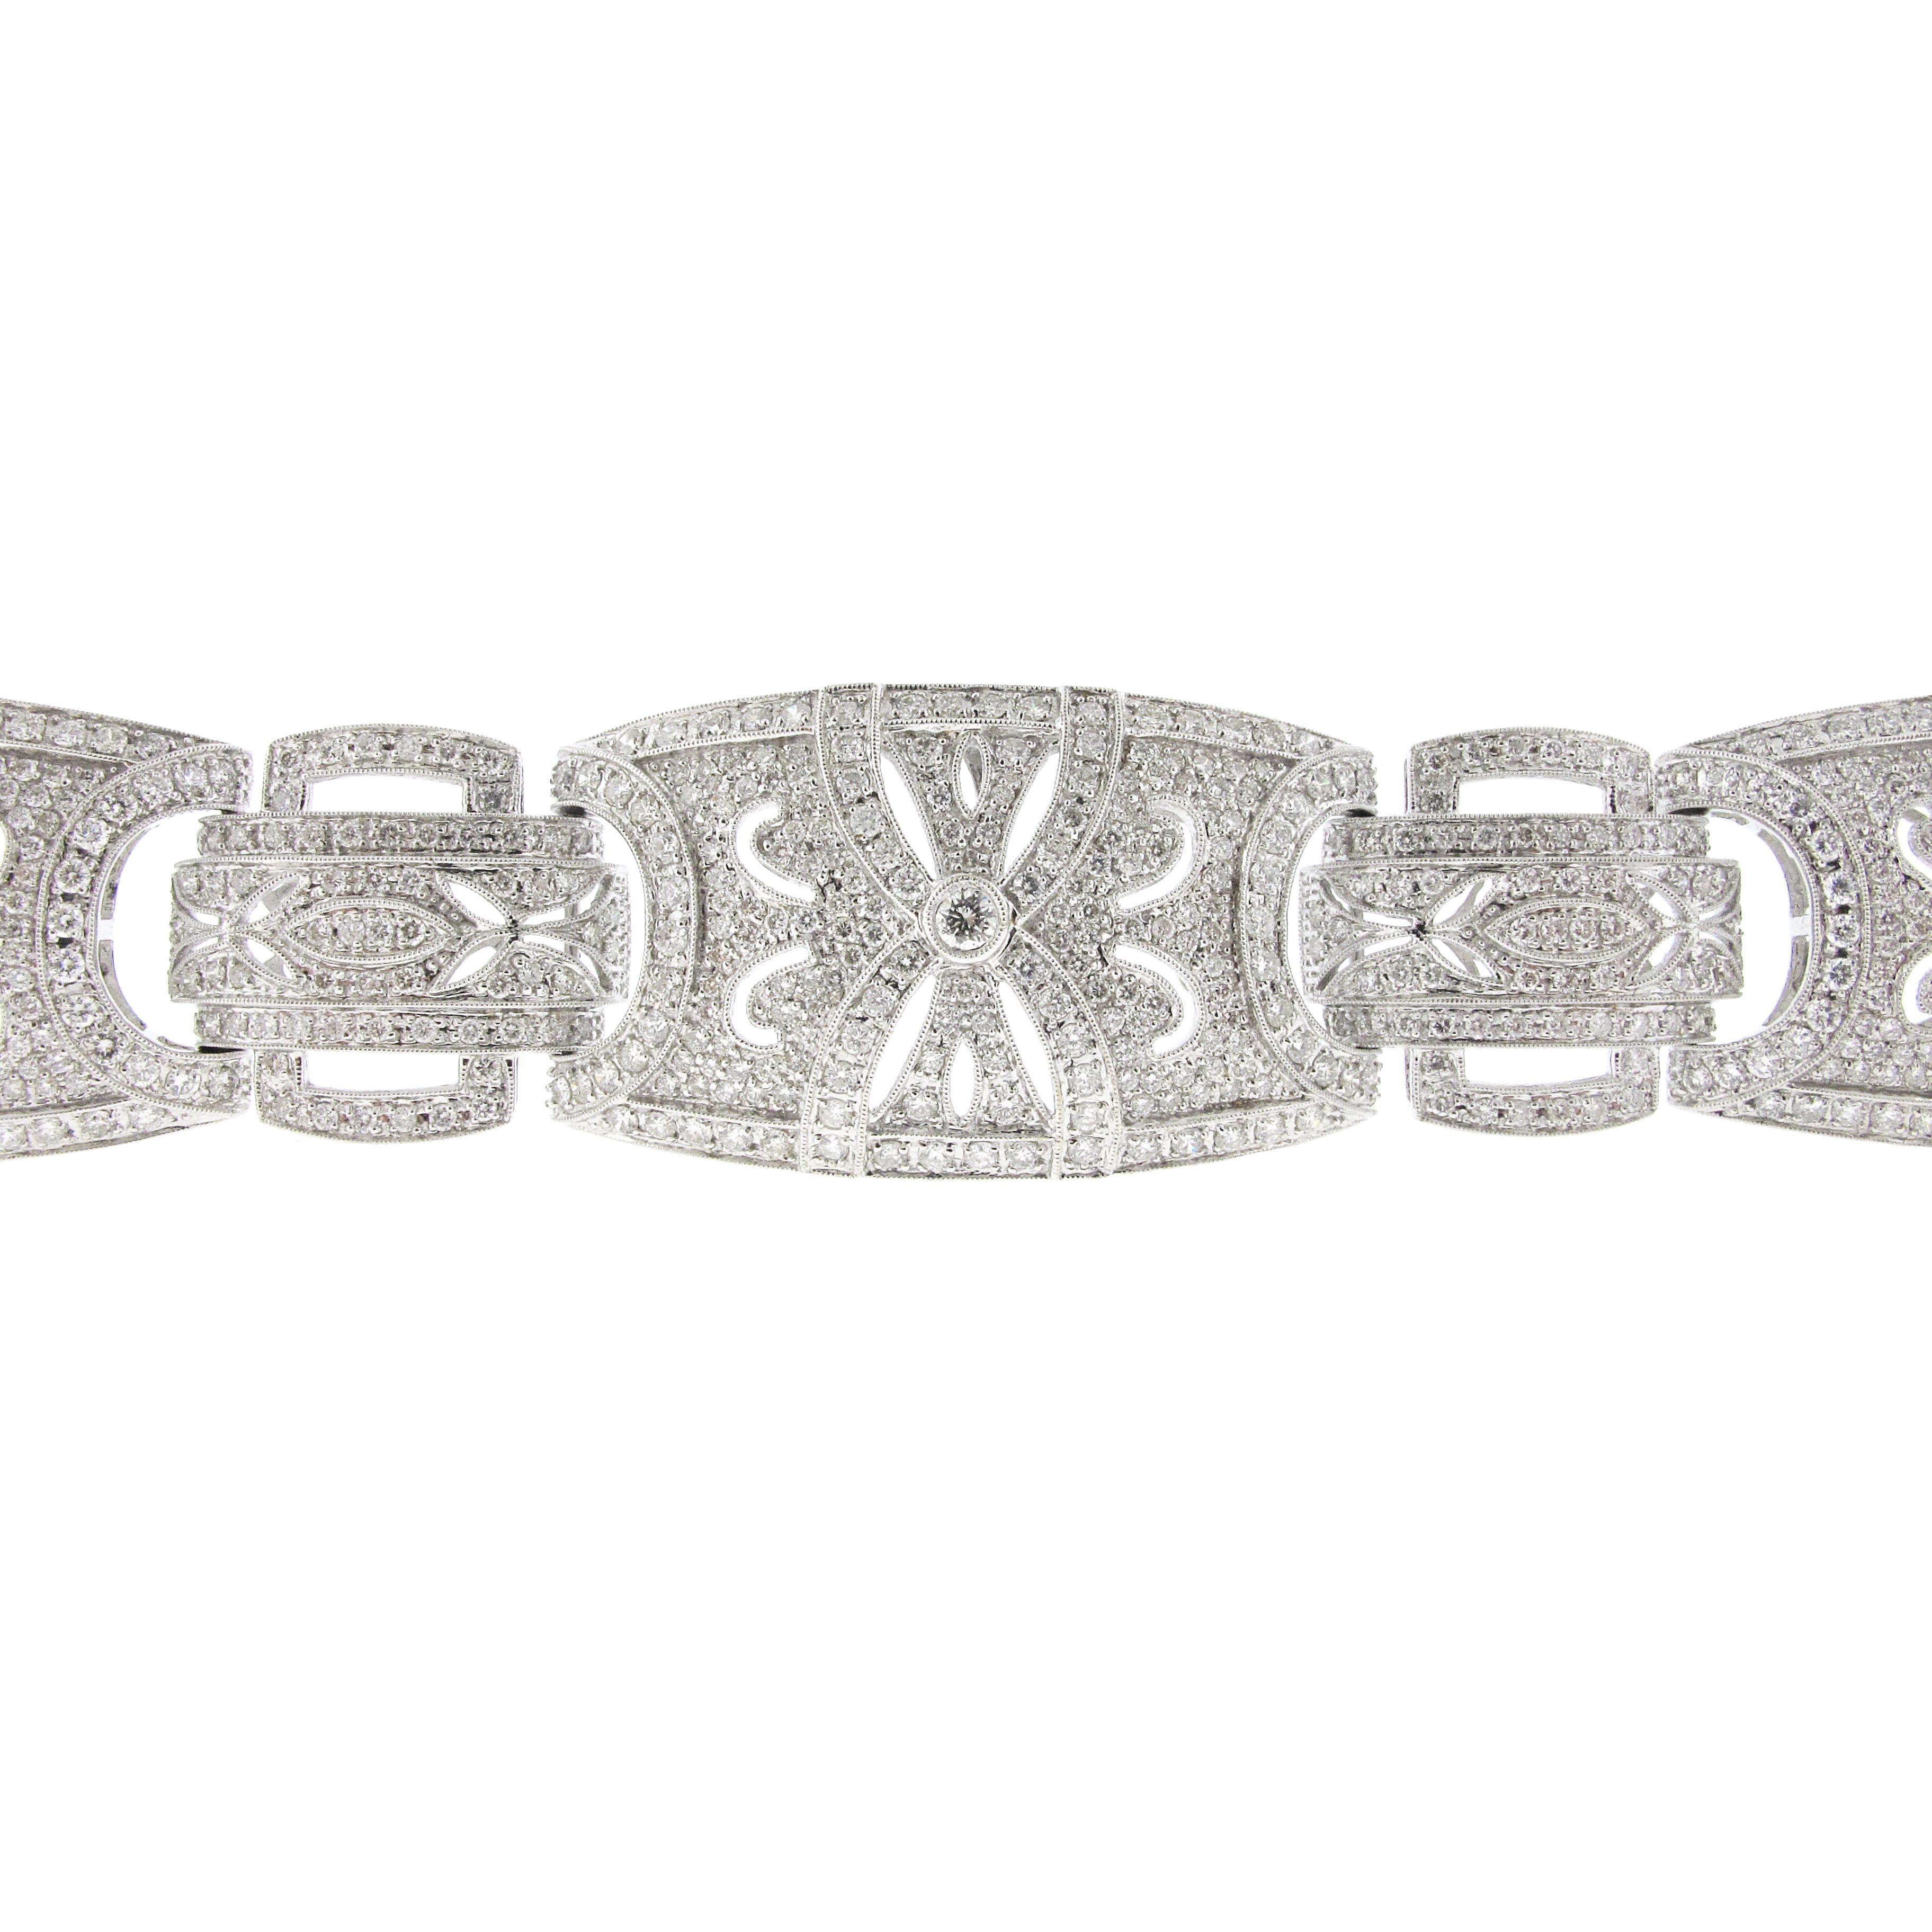 Modern style diamond bracelet made in 18 karat white gold. There is an estimated carat weight of 14.75. The diamonds are white in color and eye clean.
The bracelet allows for a big look without a big price. 
The bracelet was made in 18 karat white